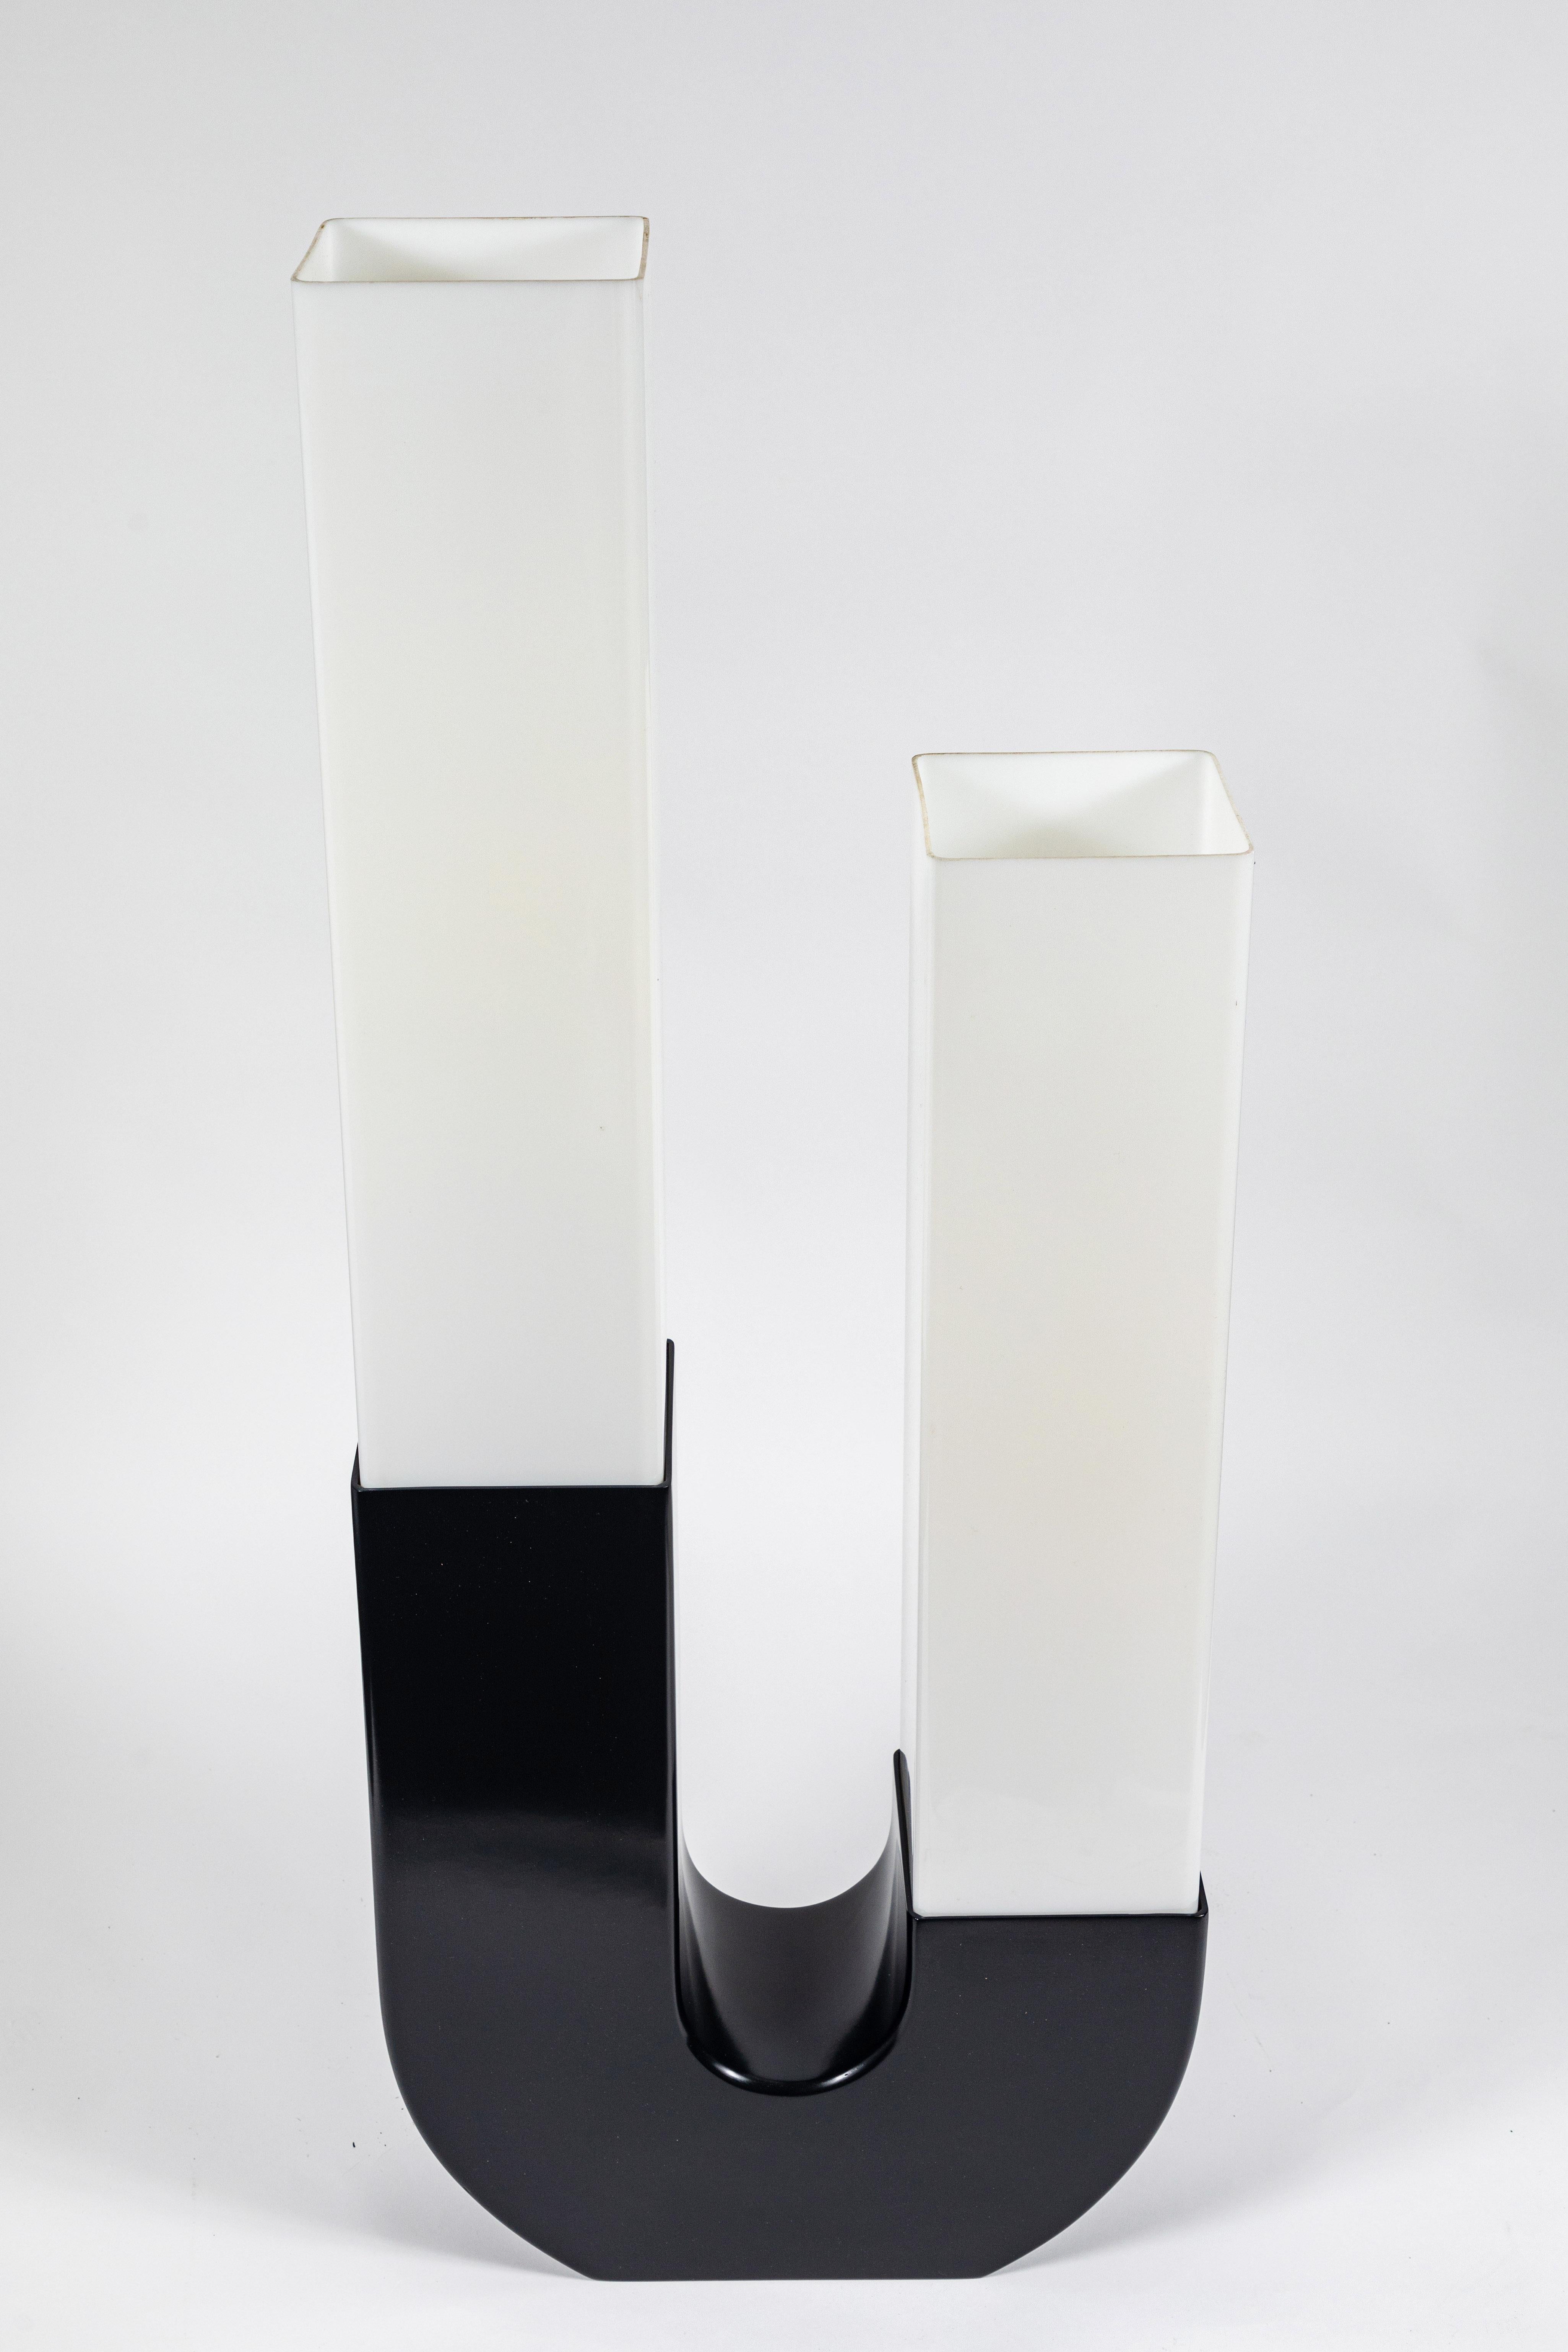 Acrylic Monumental Pair of Wood and Resin Lamps by Modline, 1960s For Sale